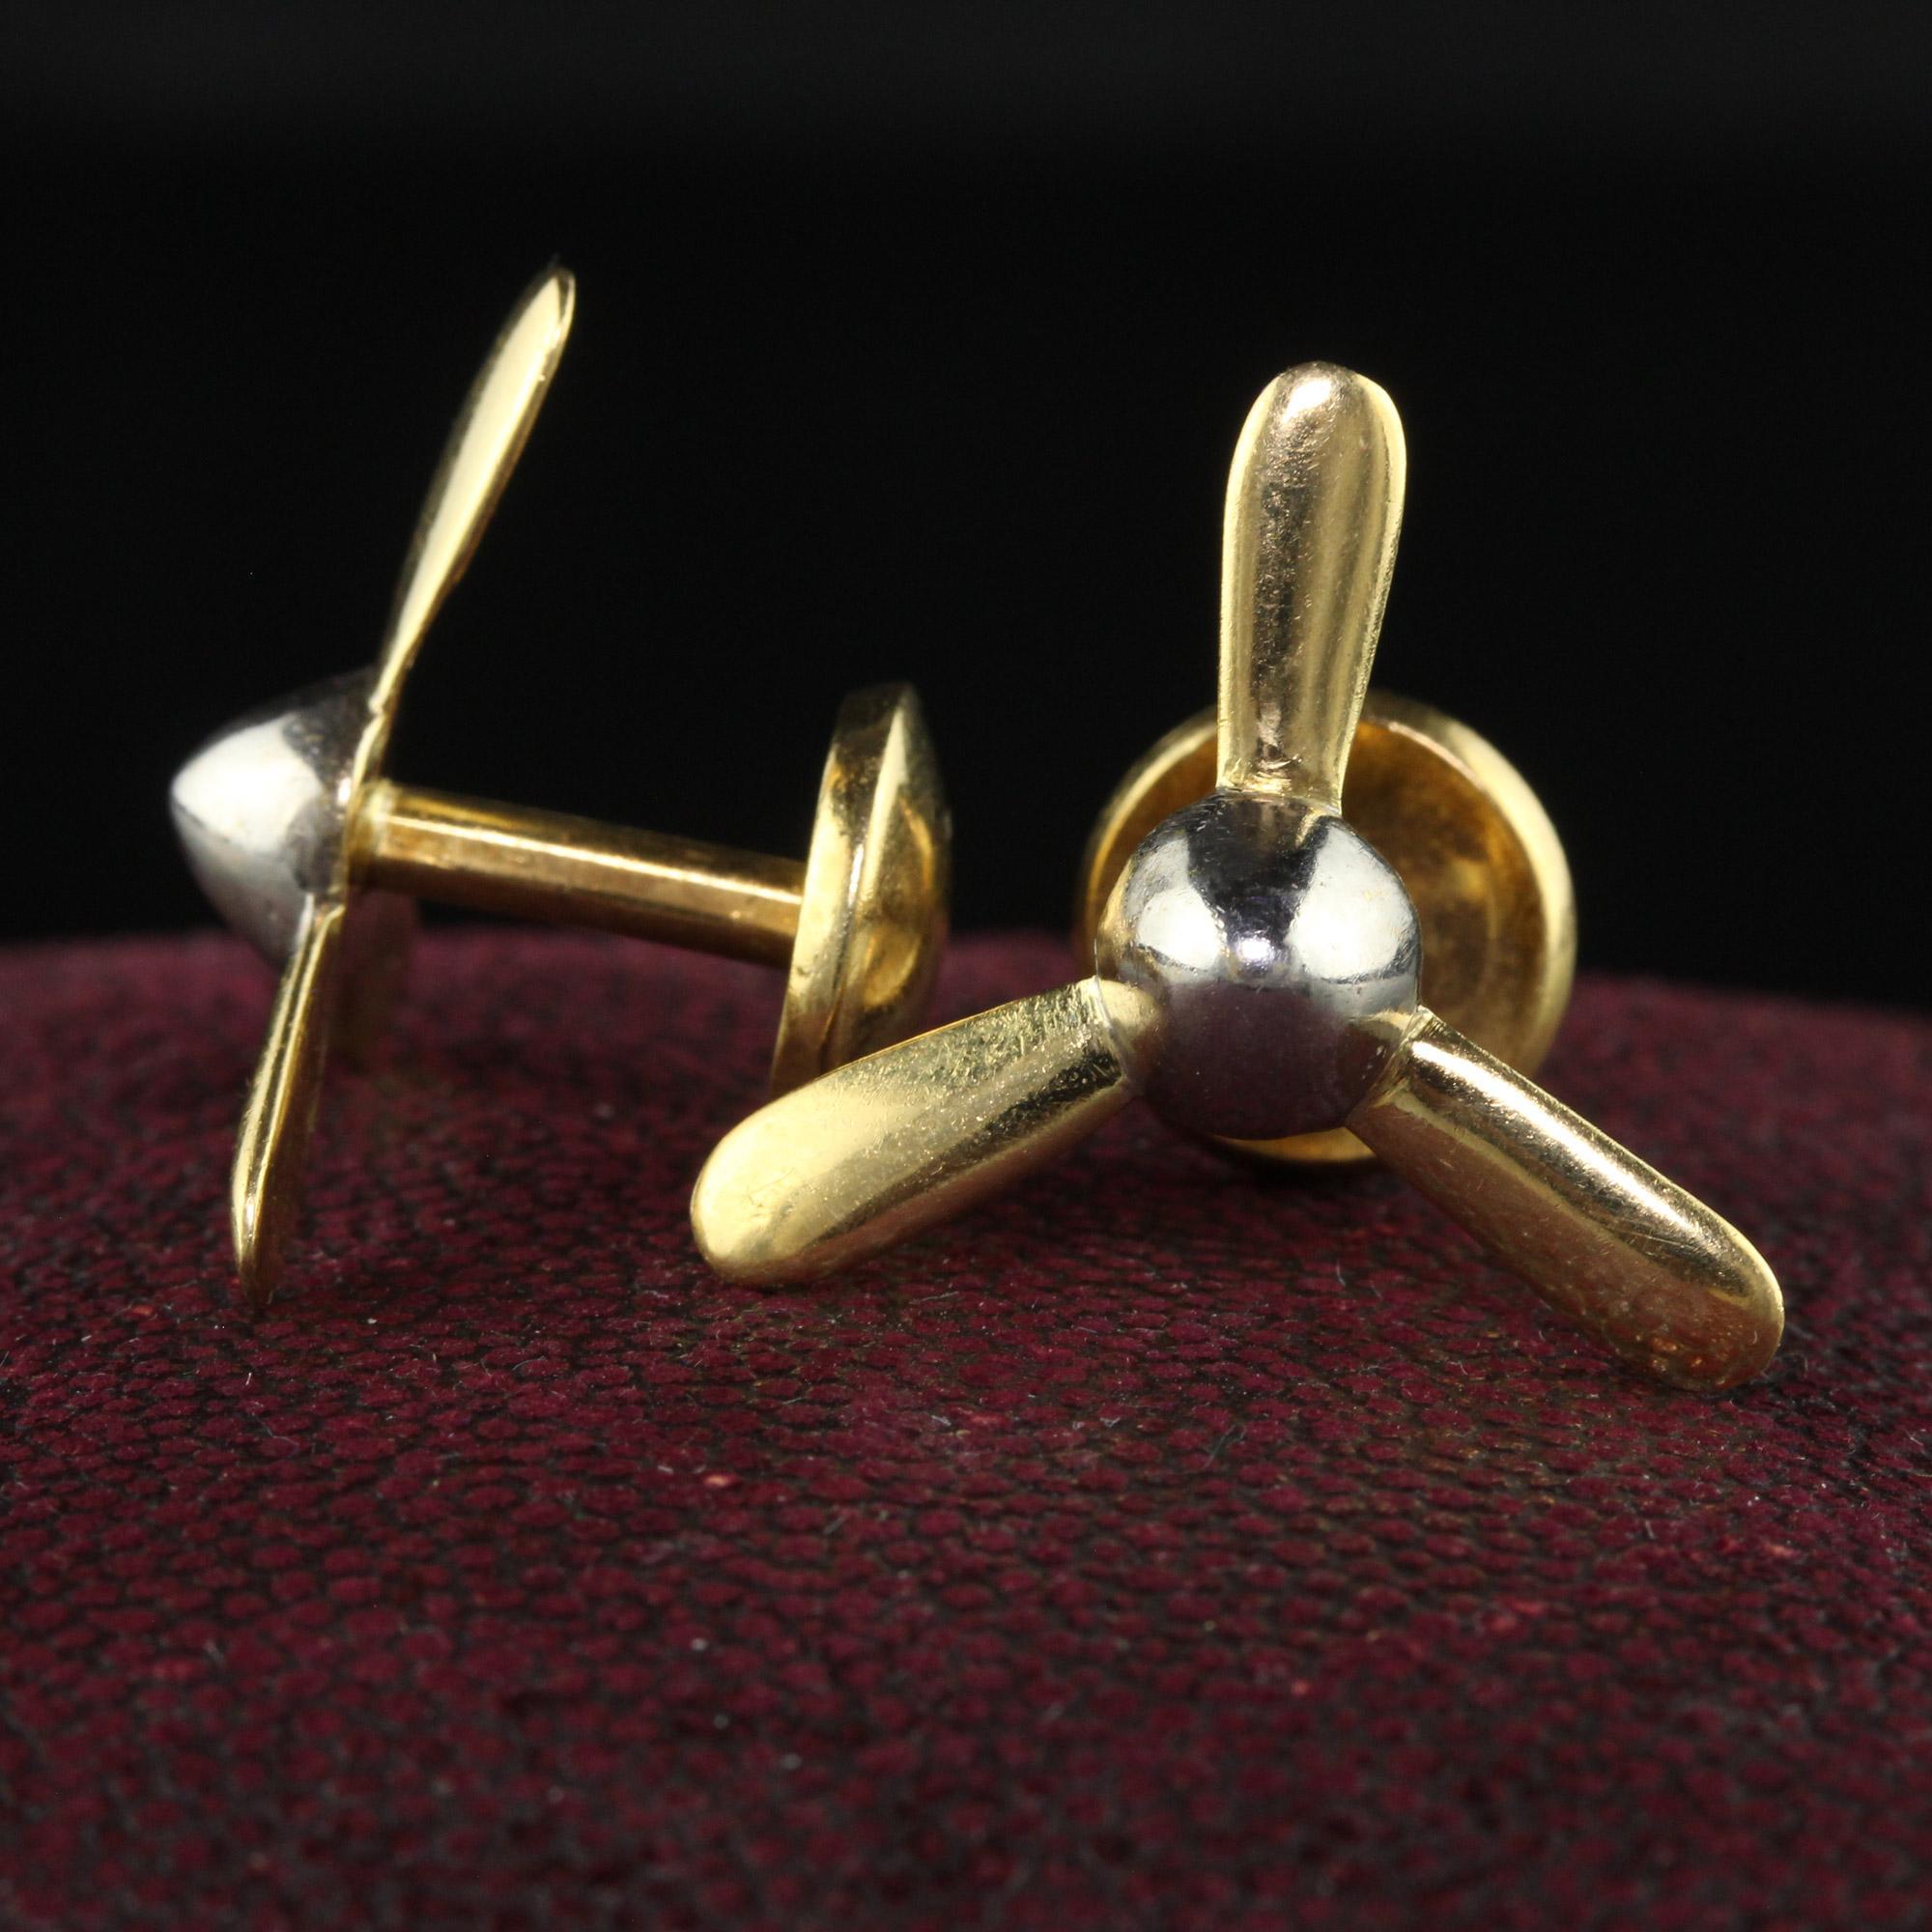 Vintage Retro 18K Gold and Platinum Propeller Cufflinks In Good Condition For Sale In Great Neck, NY